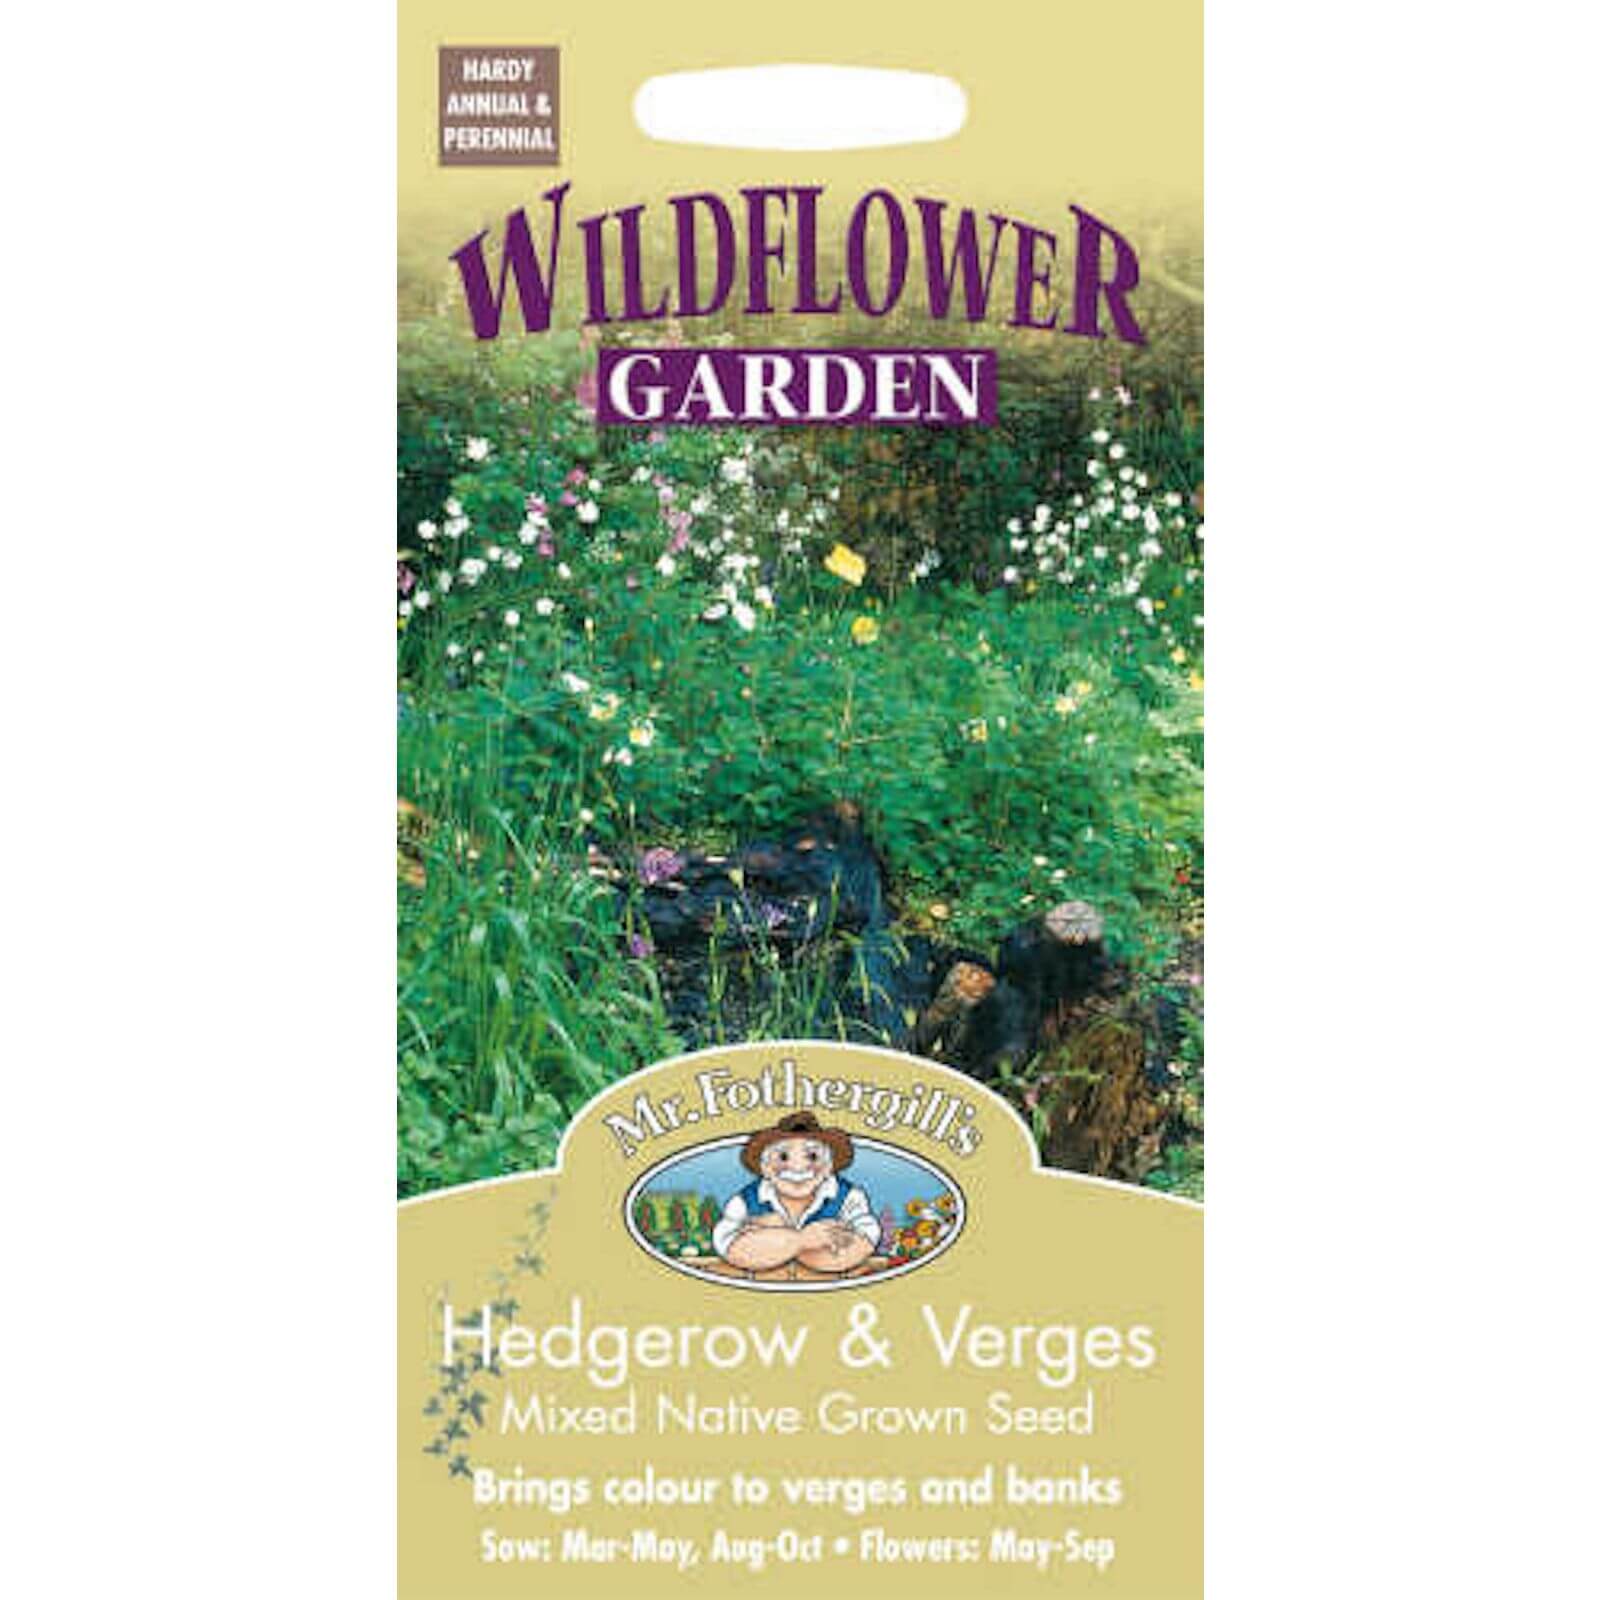 Mr. Fothergill's Hedgerow & Verges Seeds